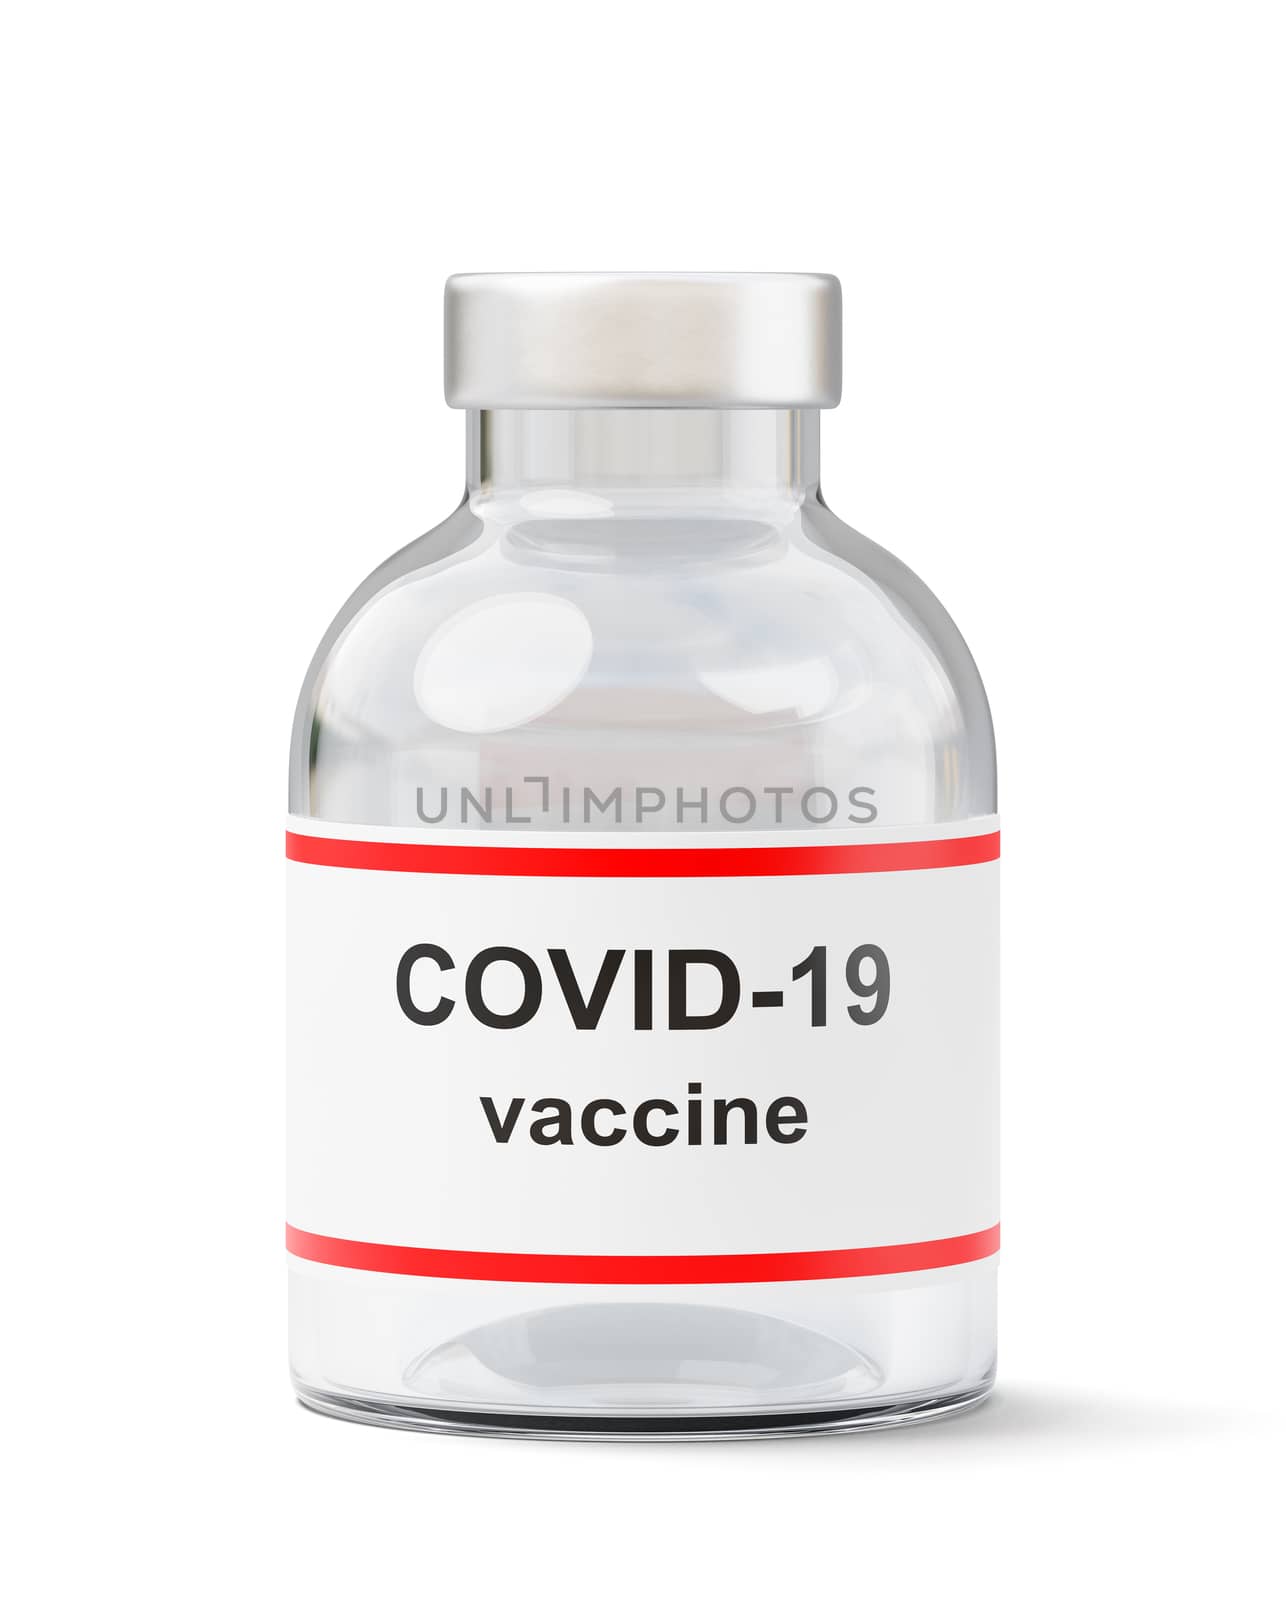 Covid 19 Vaccine Bottle Isolated on White by make